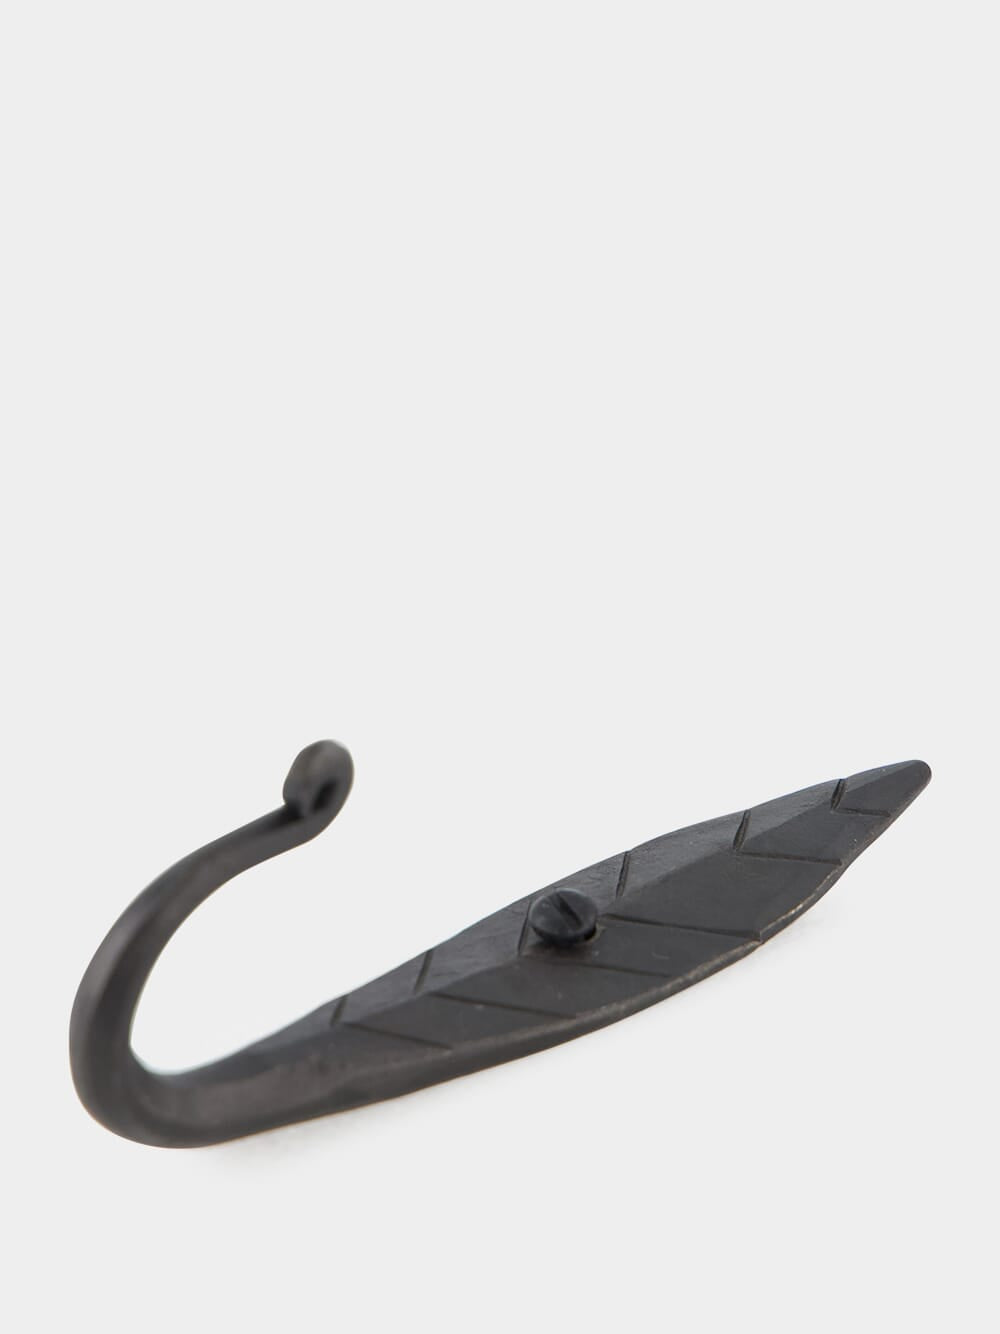 Hand-Forged Small Leaf Iron Hook